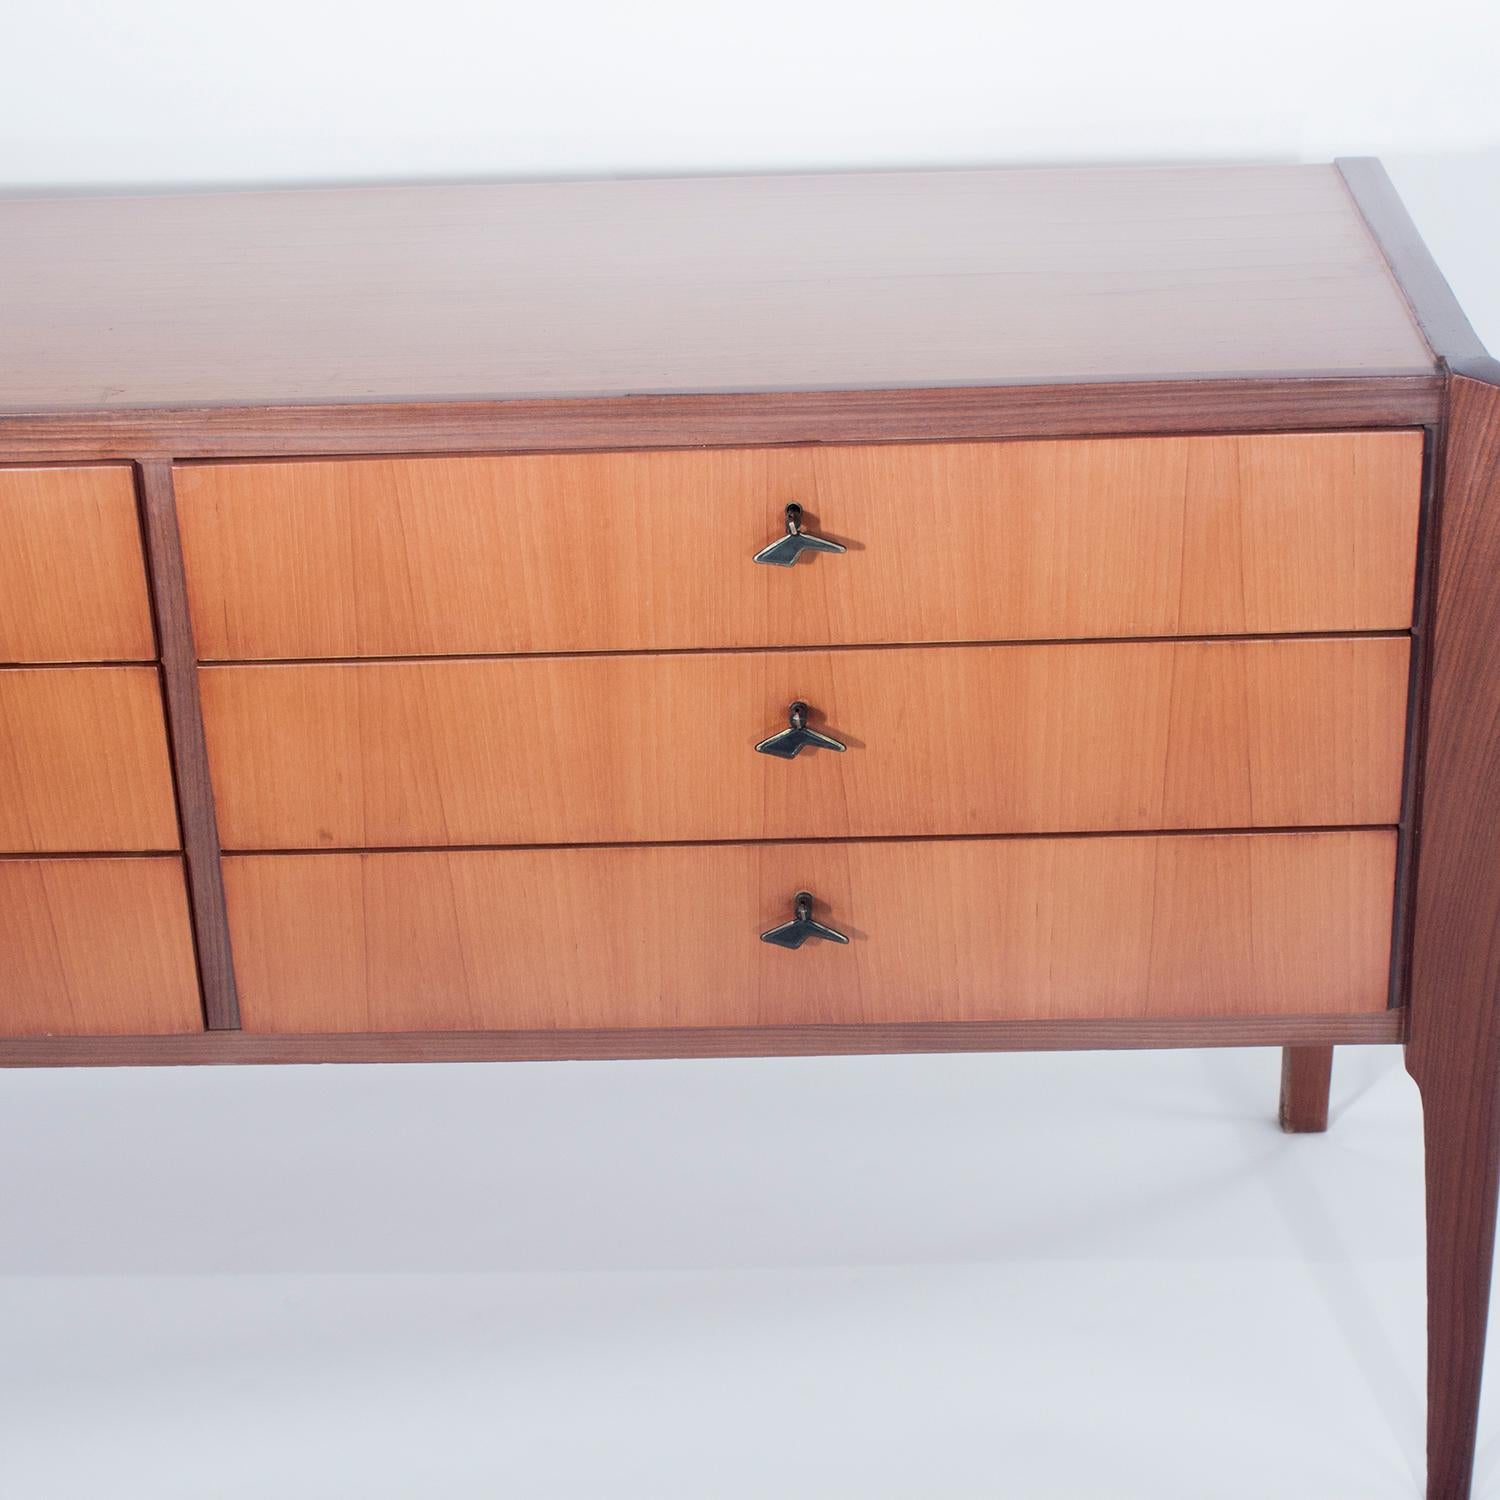 Italian sideboard, chest 1960s.
It has 6 drawers. The two drawers above can be closed, the same handle is locked.
Combination of woods, one light and one darker.
Measures: 153cm x 47cm Height 74cm.